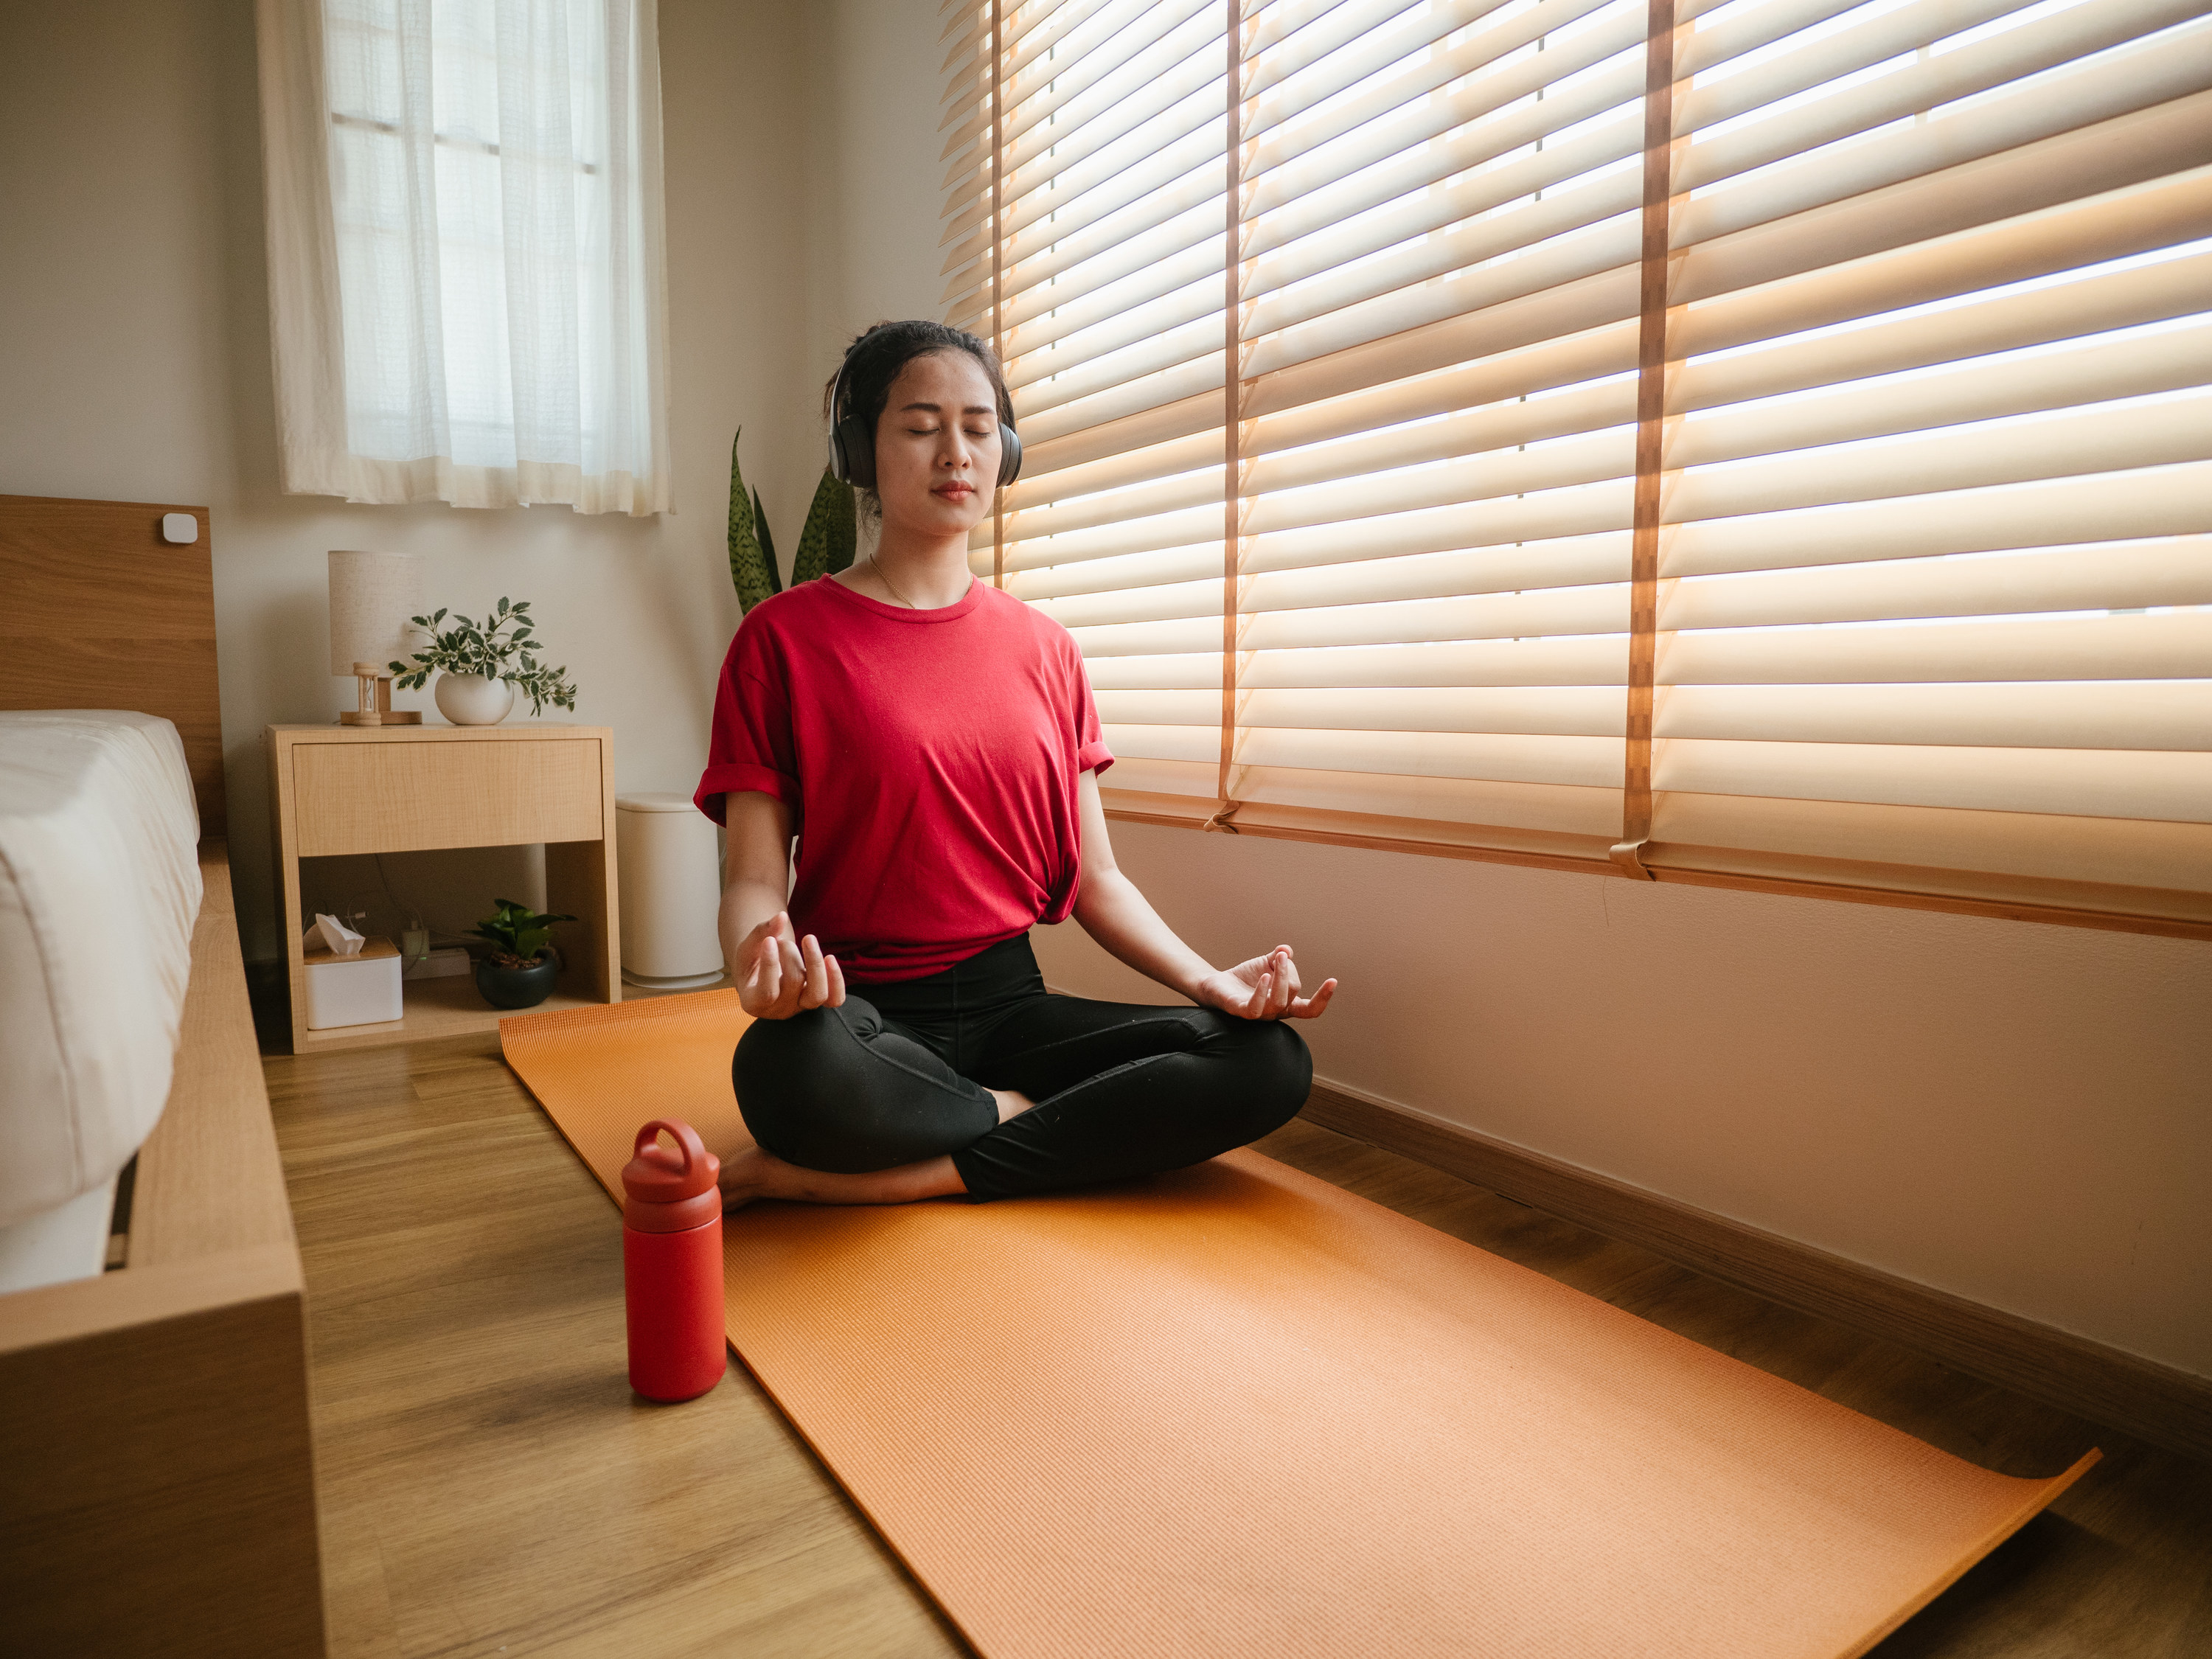 A woman in a red shirt sits meditating with her legs crossed and headphones on